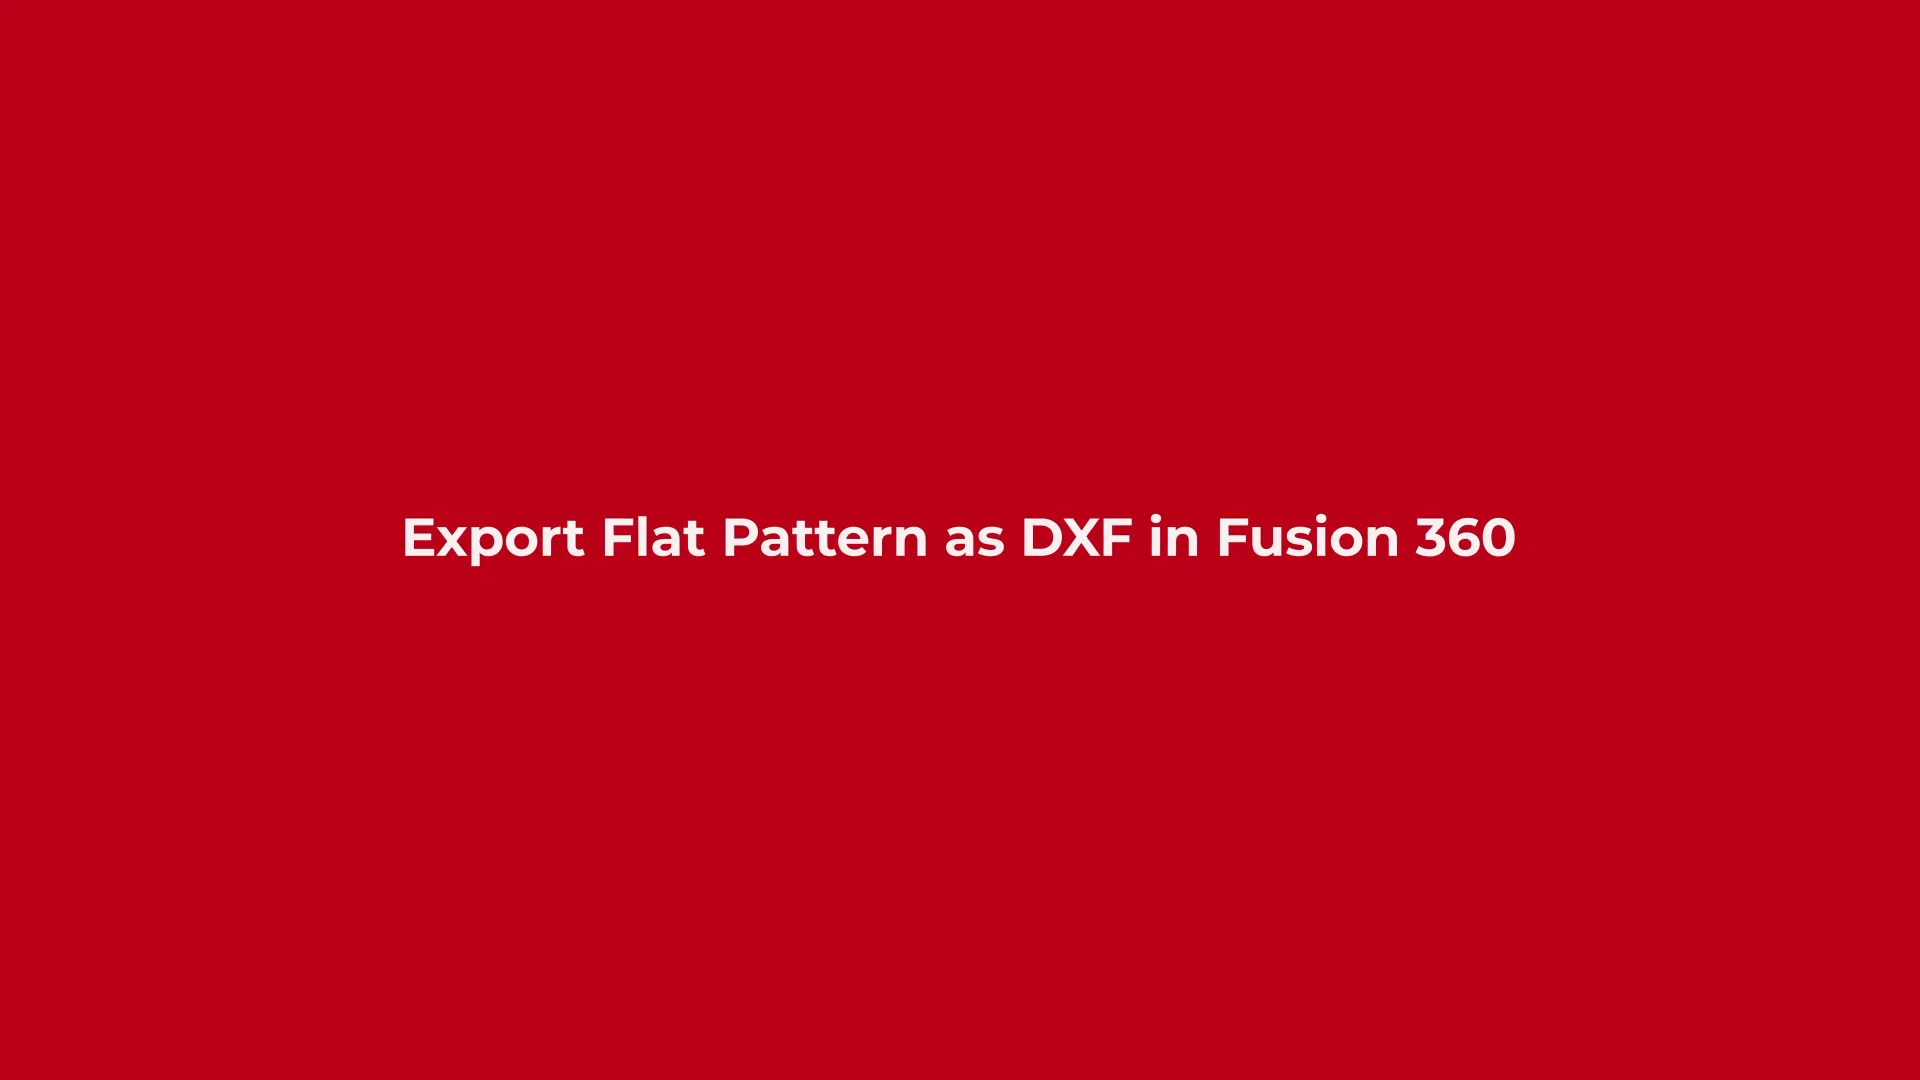 Export Flat Pattern as DXF in Fusion 360